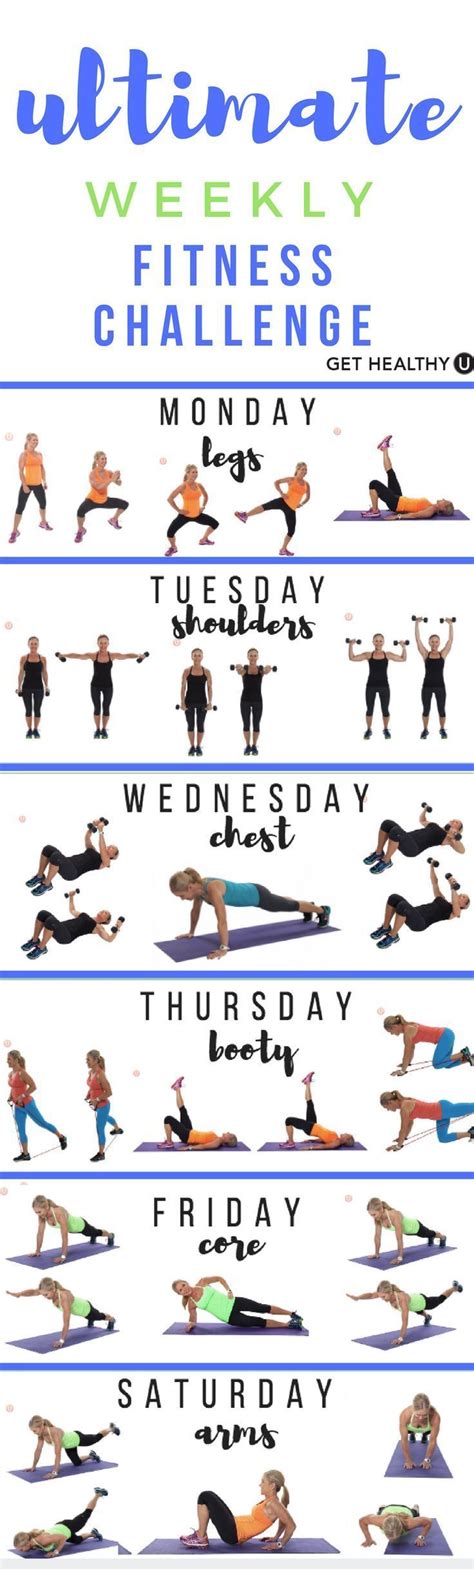 Check Out Our Ultimate Weekly Fitness Challenge Weve Come Up With A